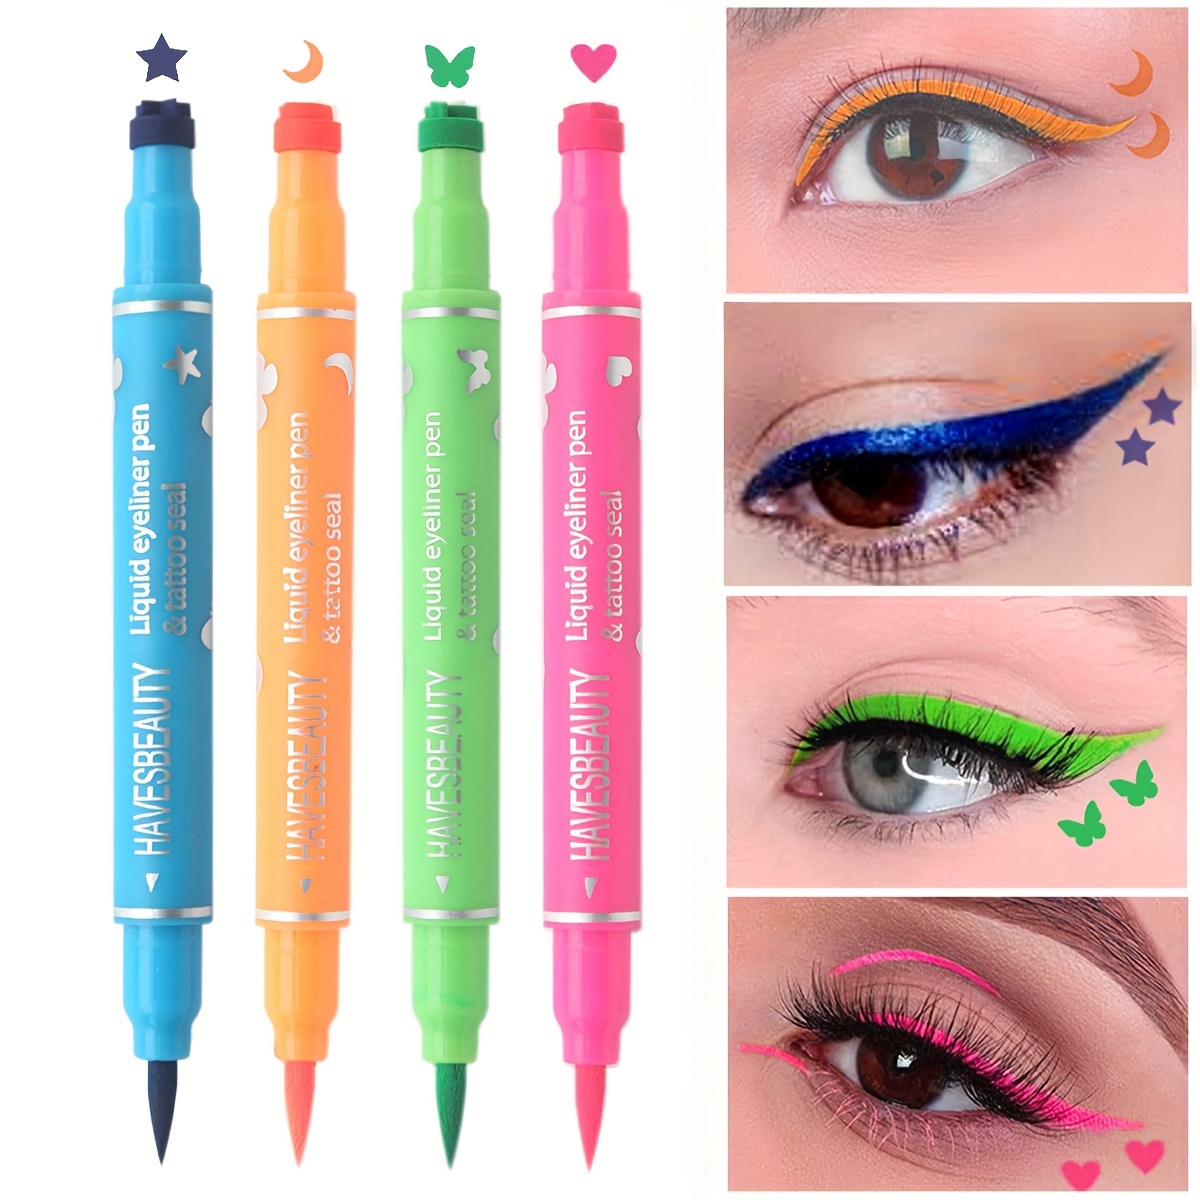 

Waterproof Liquid Eyeliner Set With Stamp - Mixed Color System, Lasting Colored Dual-tip Slim Eyeliners With Moon, Star, Butterfly, Love Stamps, Smudgeproof Eye Makeup, 4 Piece Set